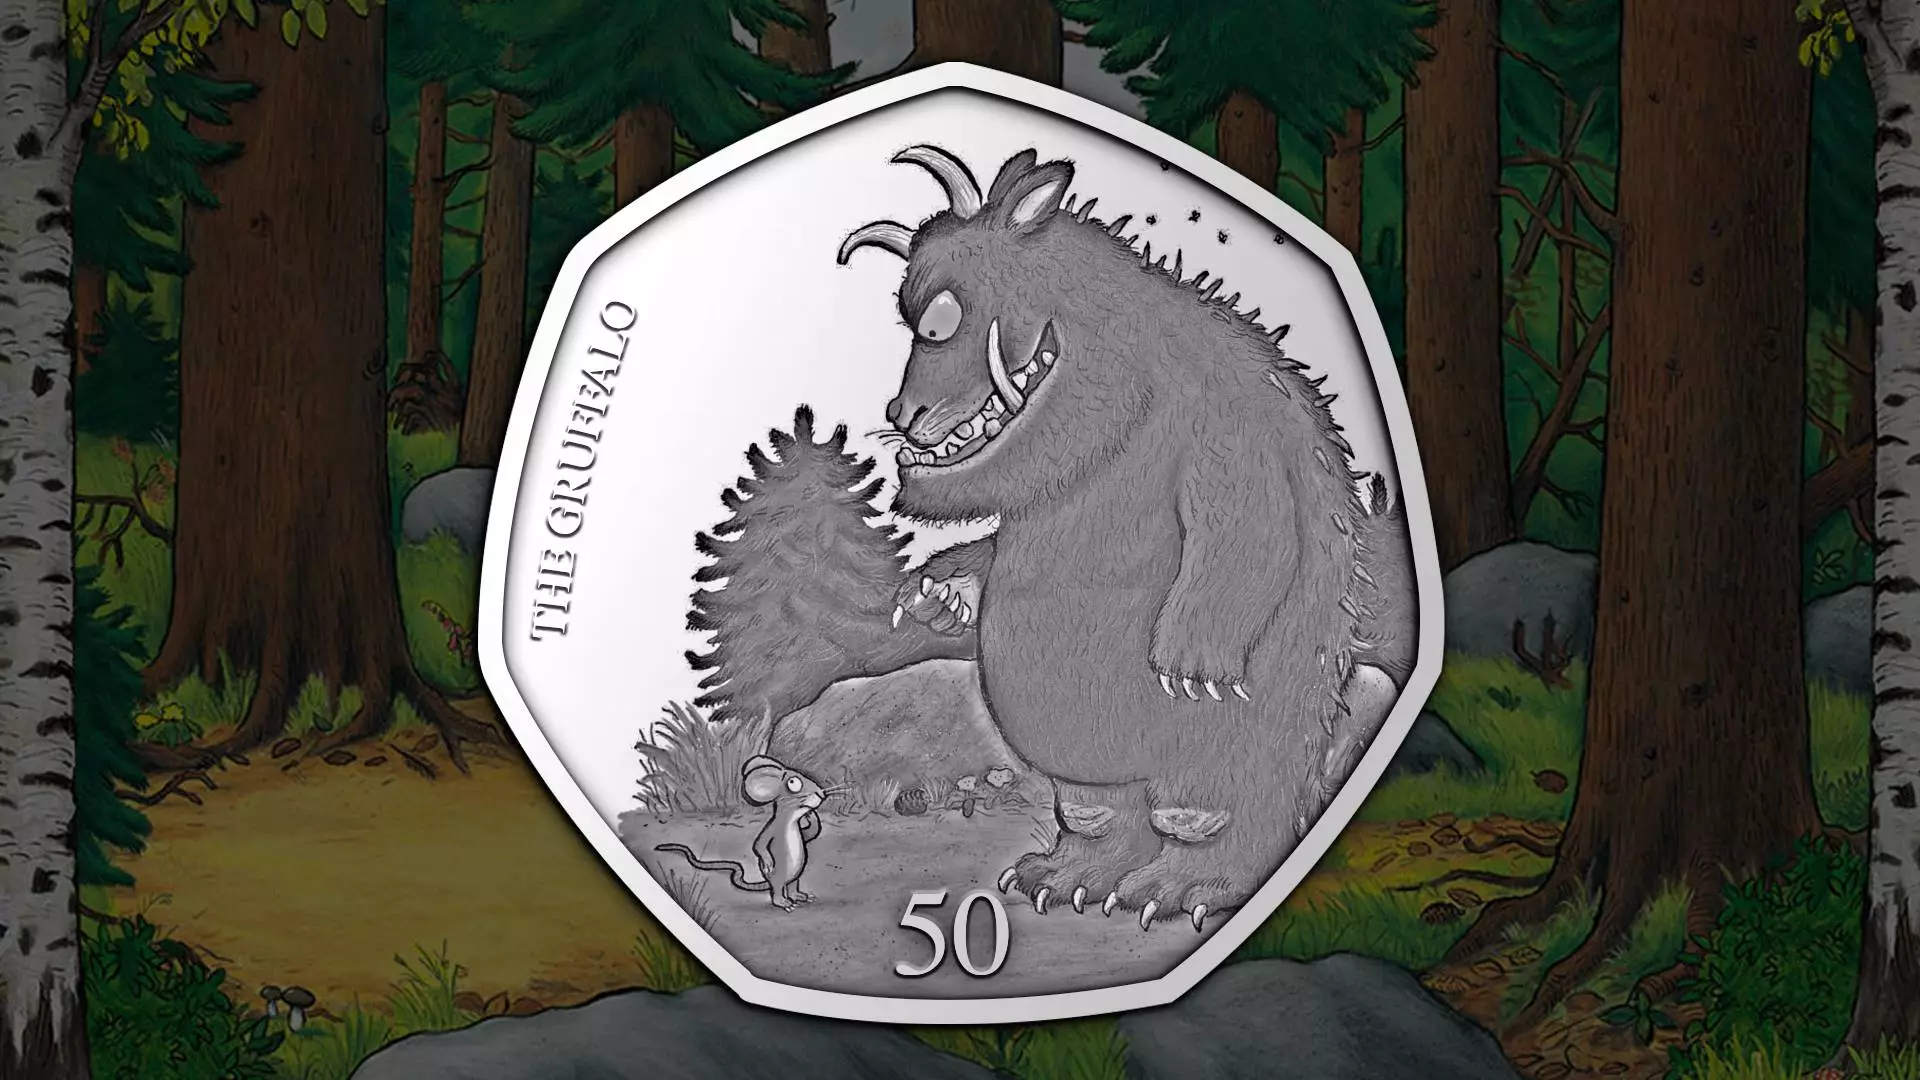 Royal Mint To Release A Special Gruffalo 50p Coin